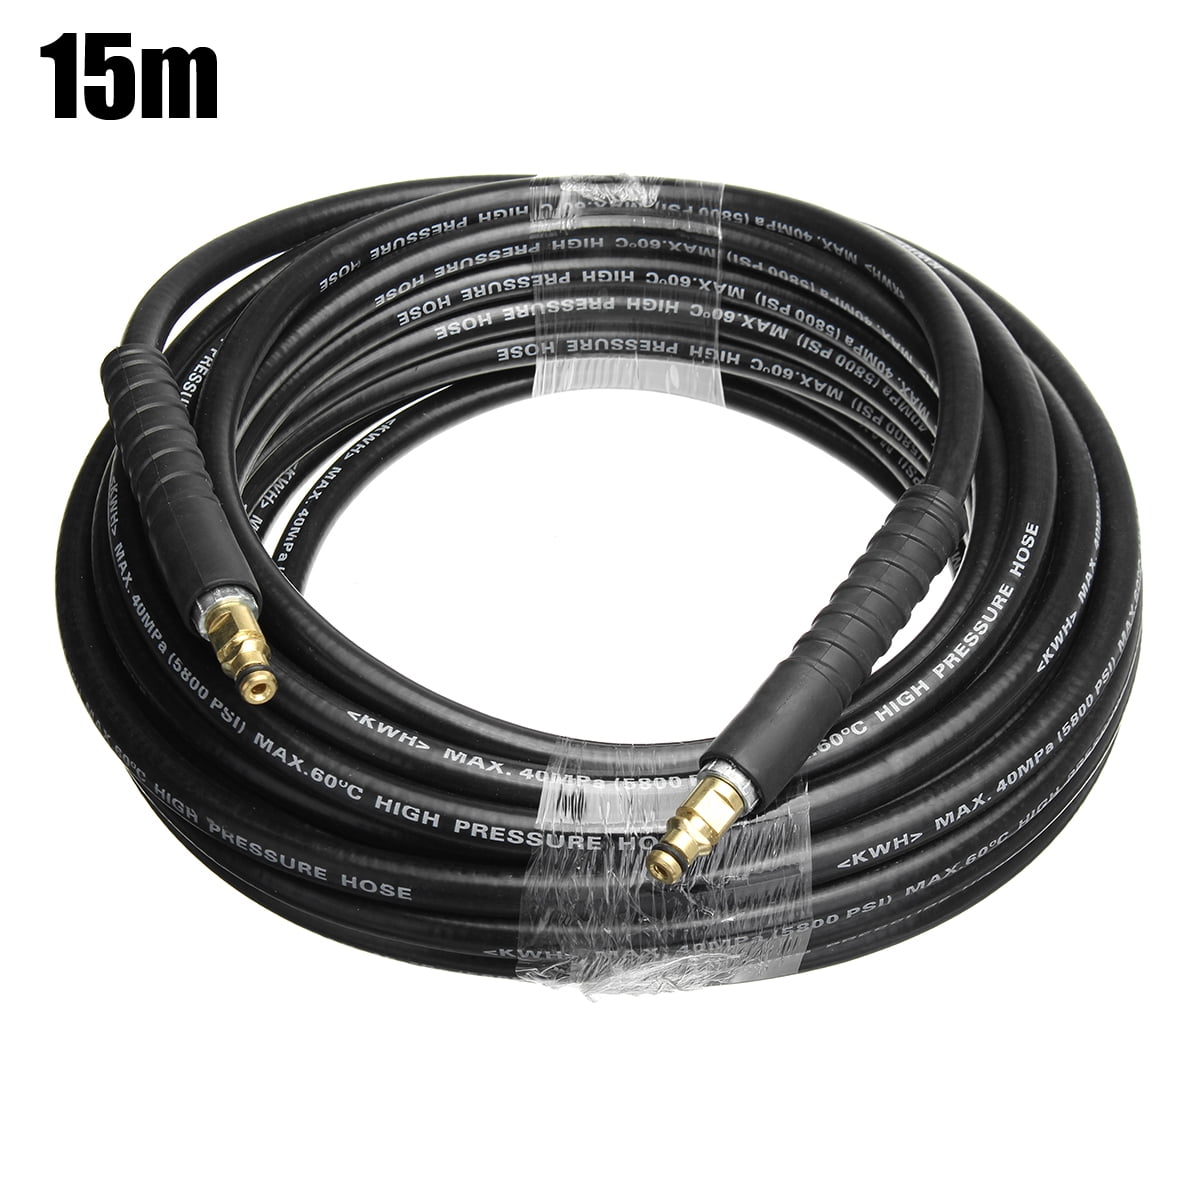 15 Metre Karcher HD 650 Type Pressure Washer Replacement Hose Fifteen 15M M 